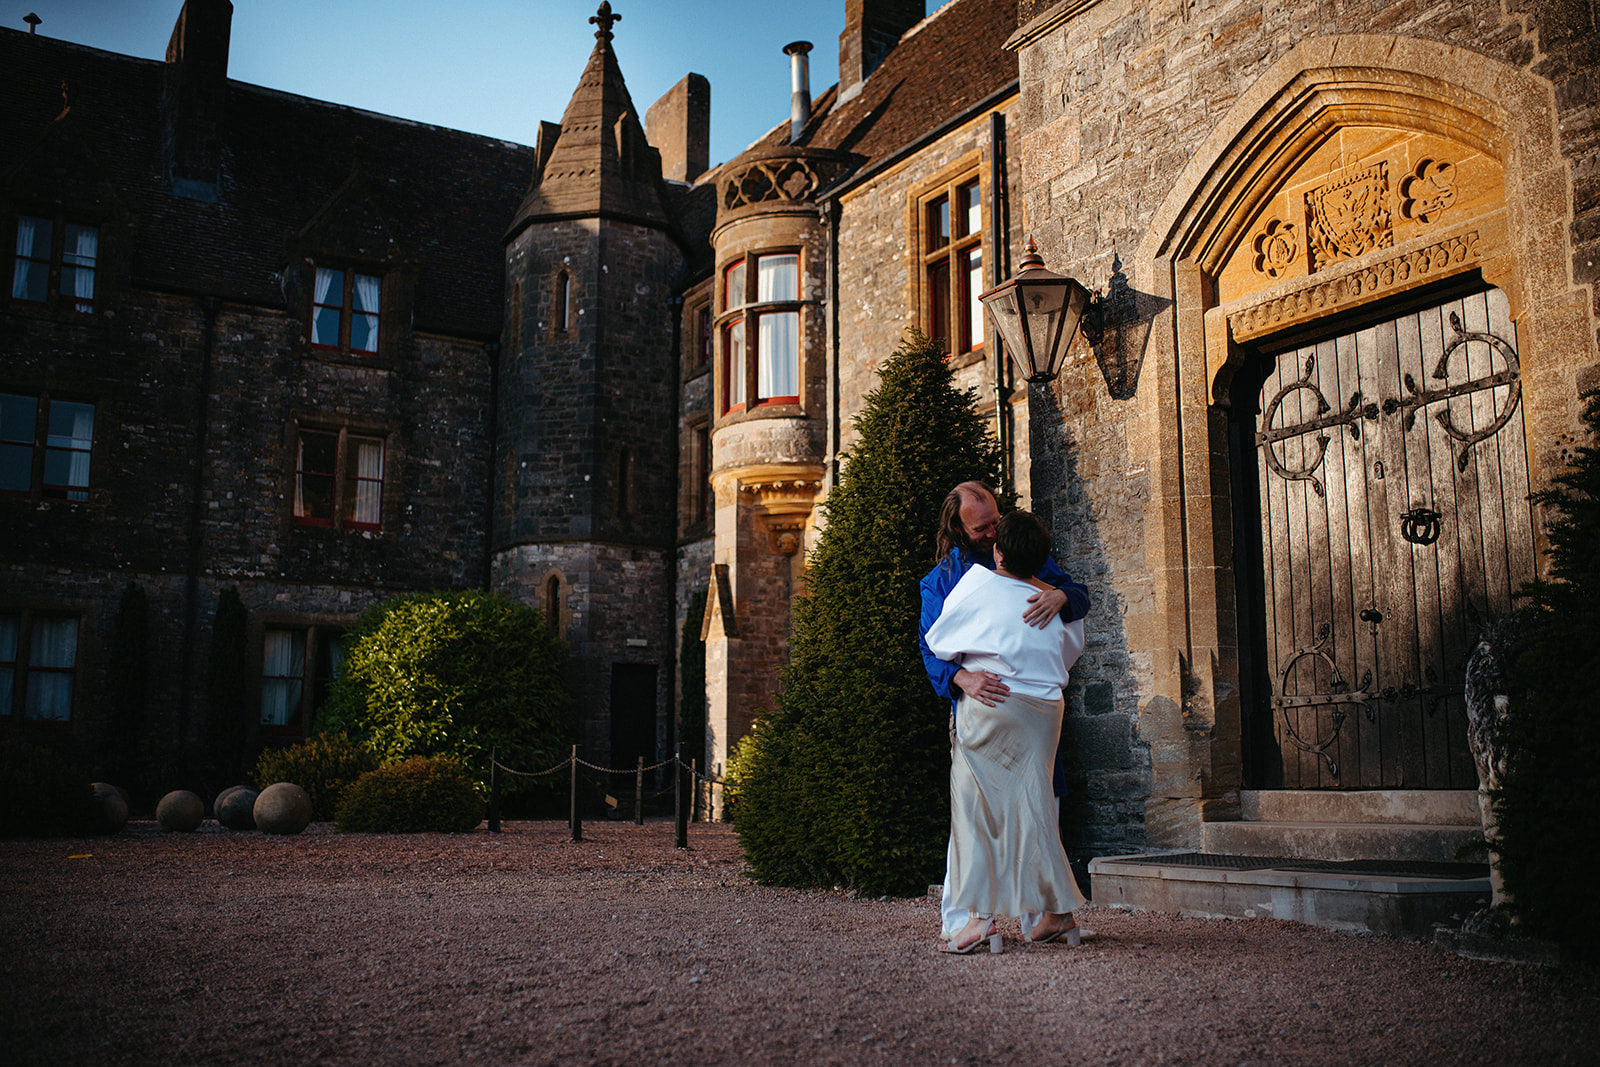 A kiss to remember: Embracing romance, the couple kisses in front of the stunning Huntsham Court castle, England